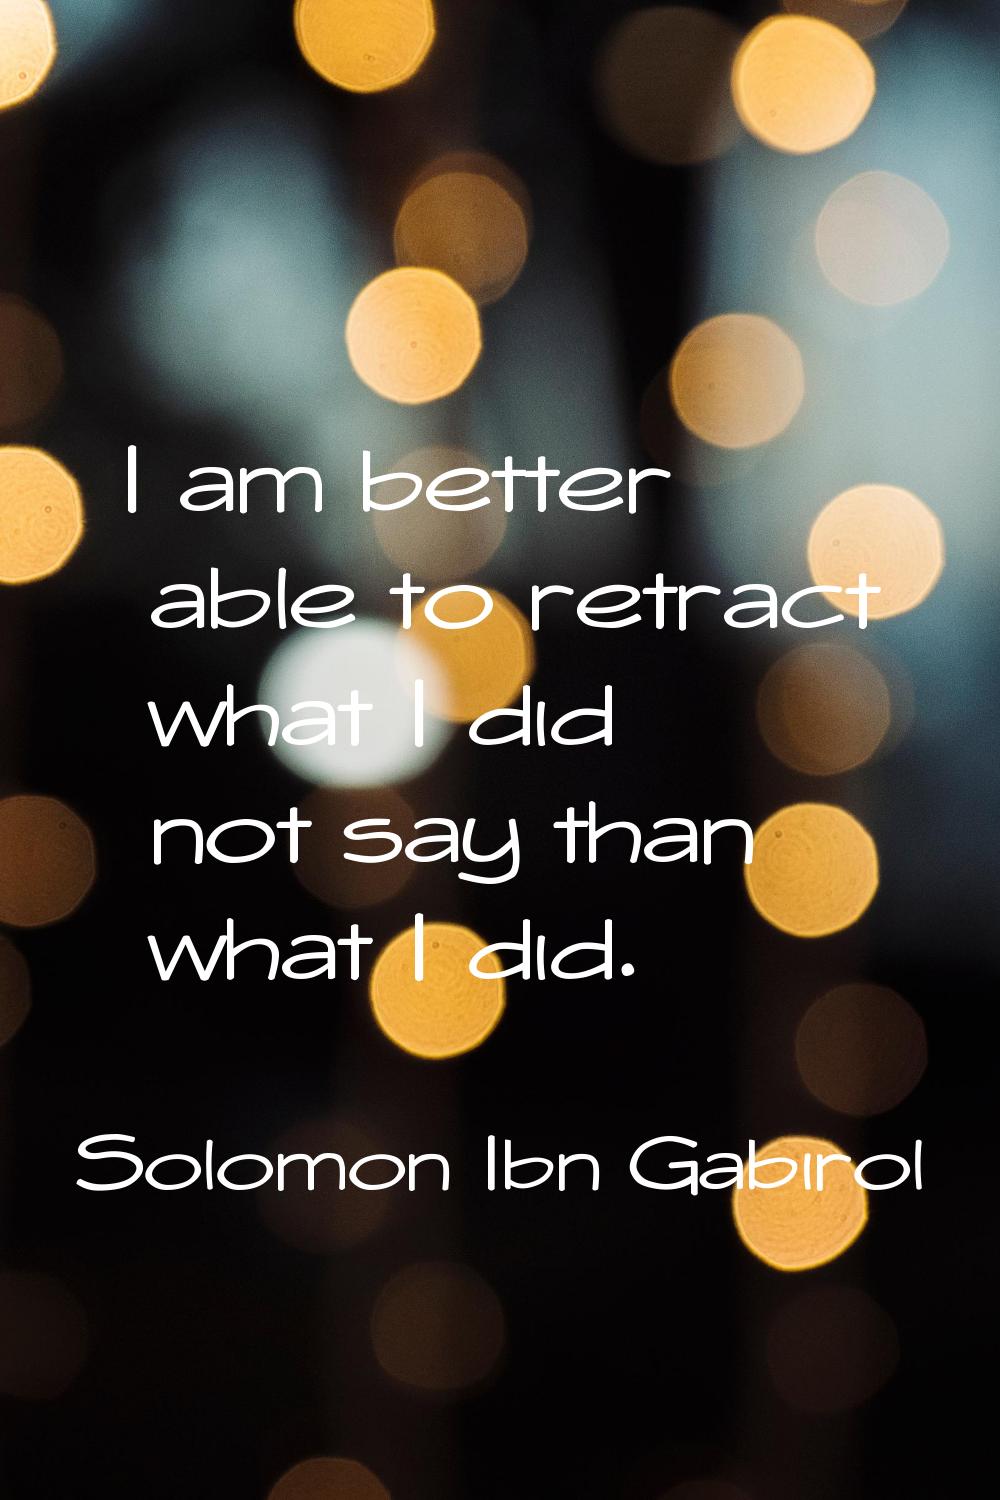 I am better able to retract what I did not say than what I did.